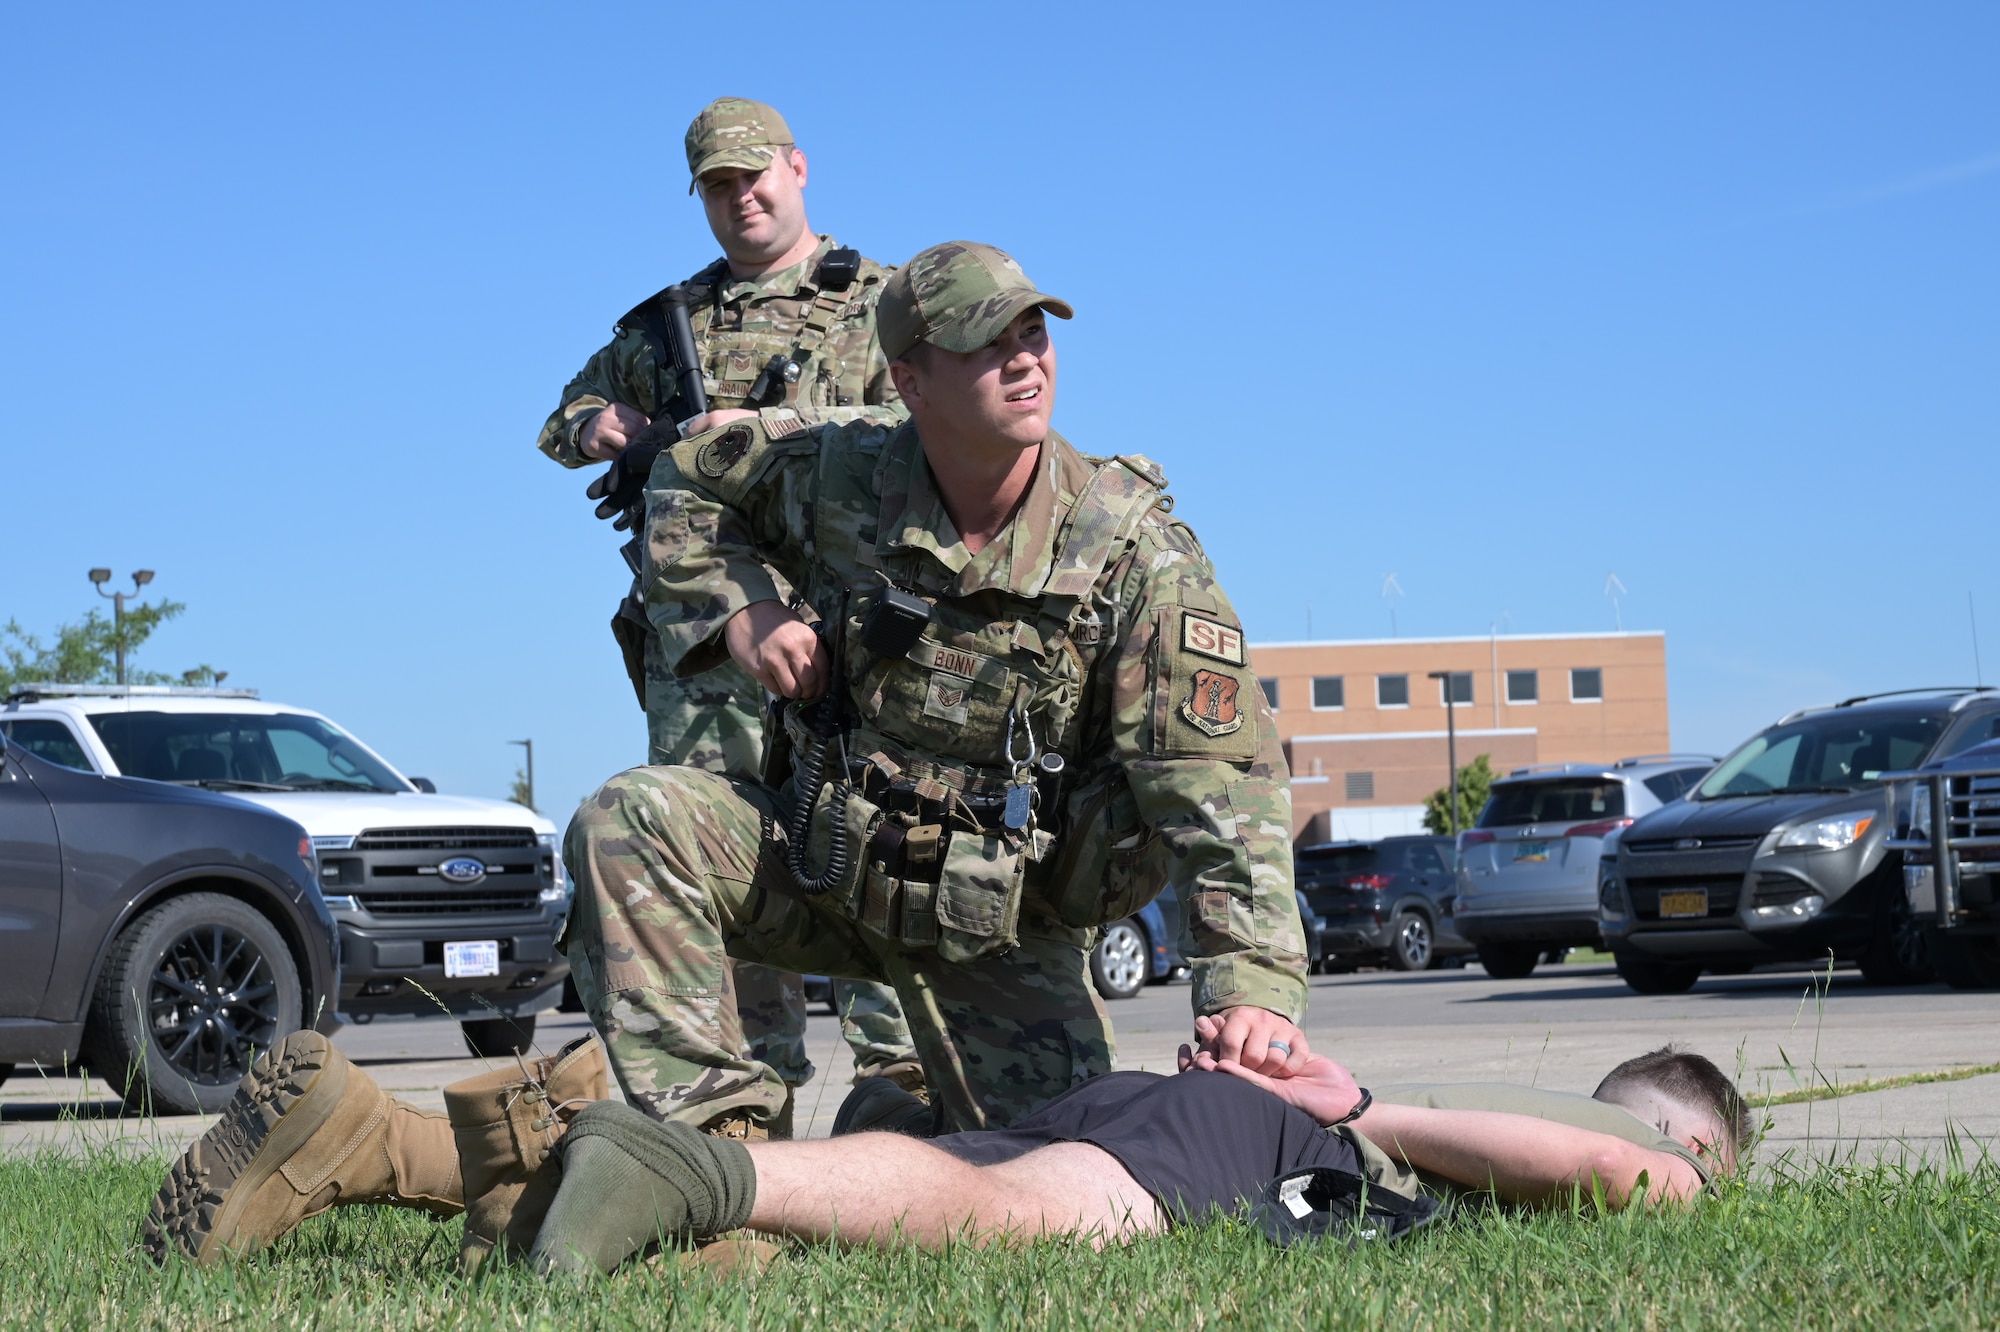 an Airman searches a simulated intruder held on the ground